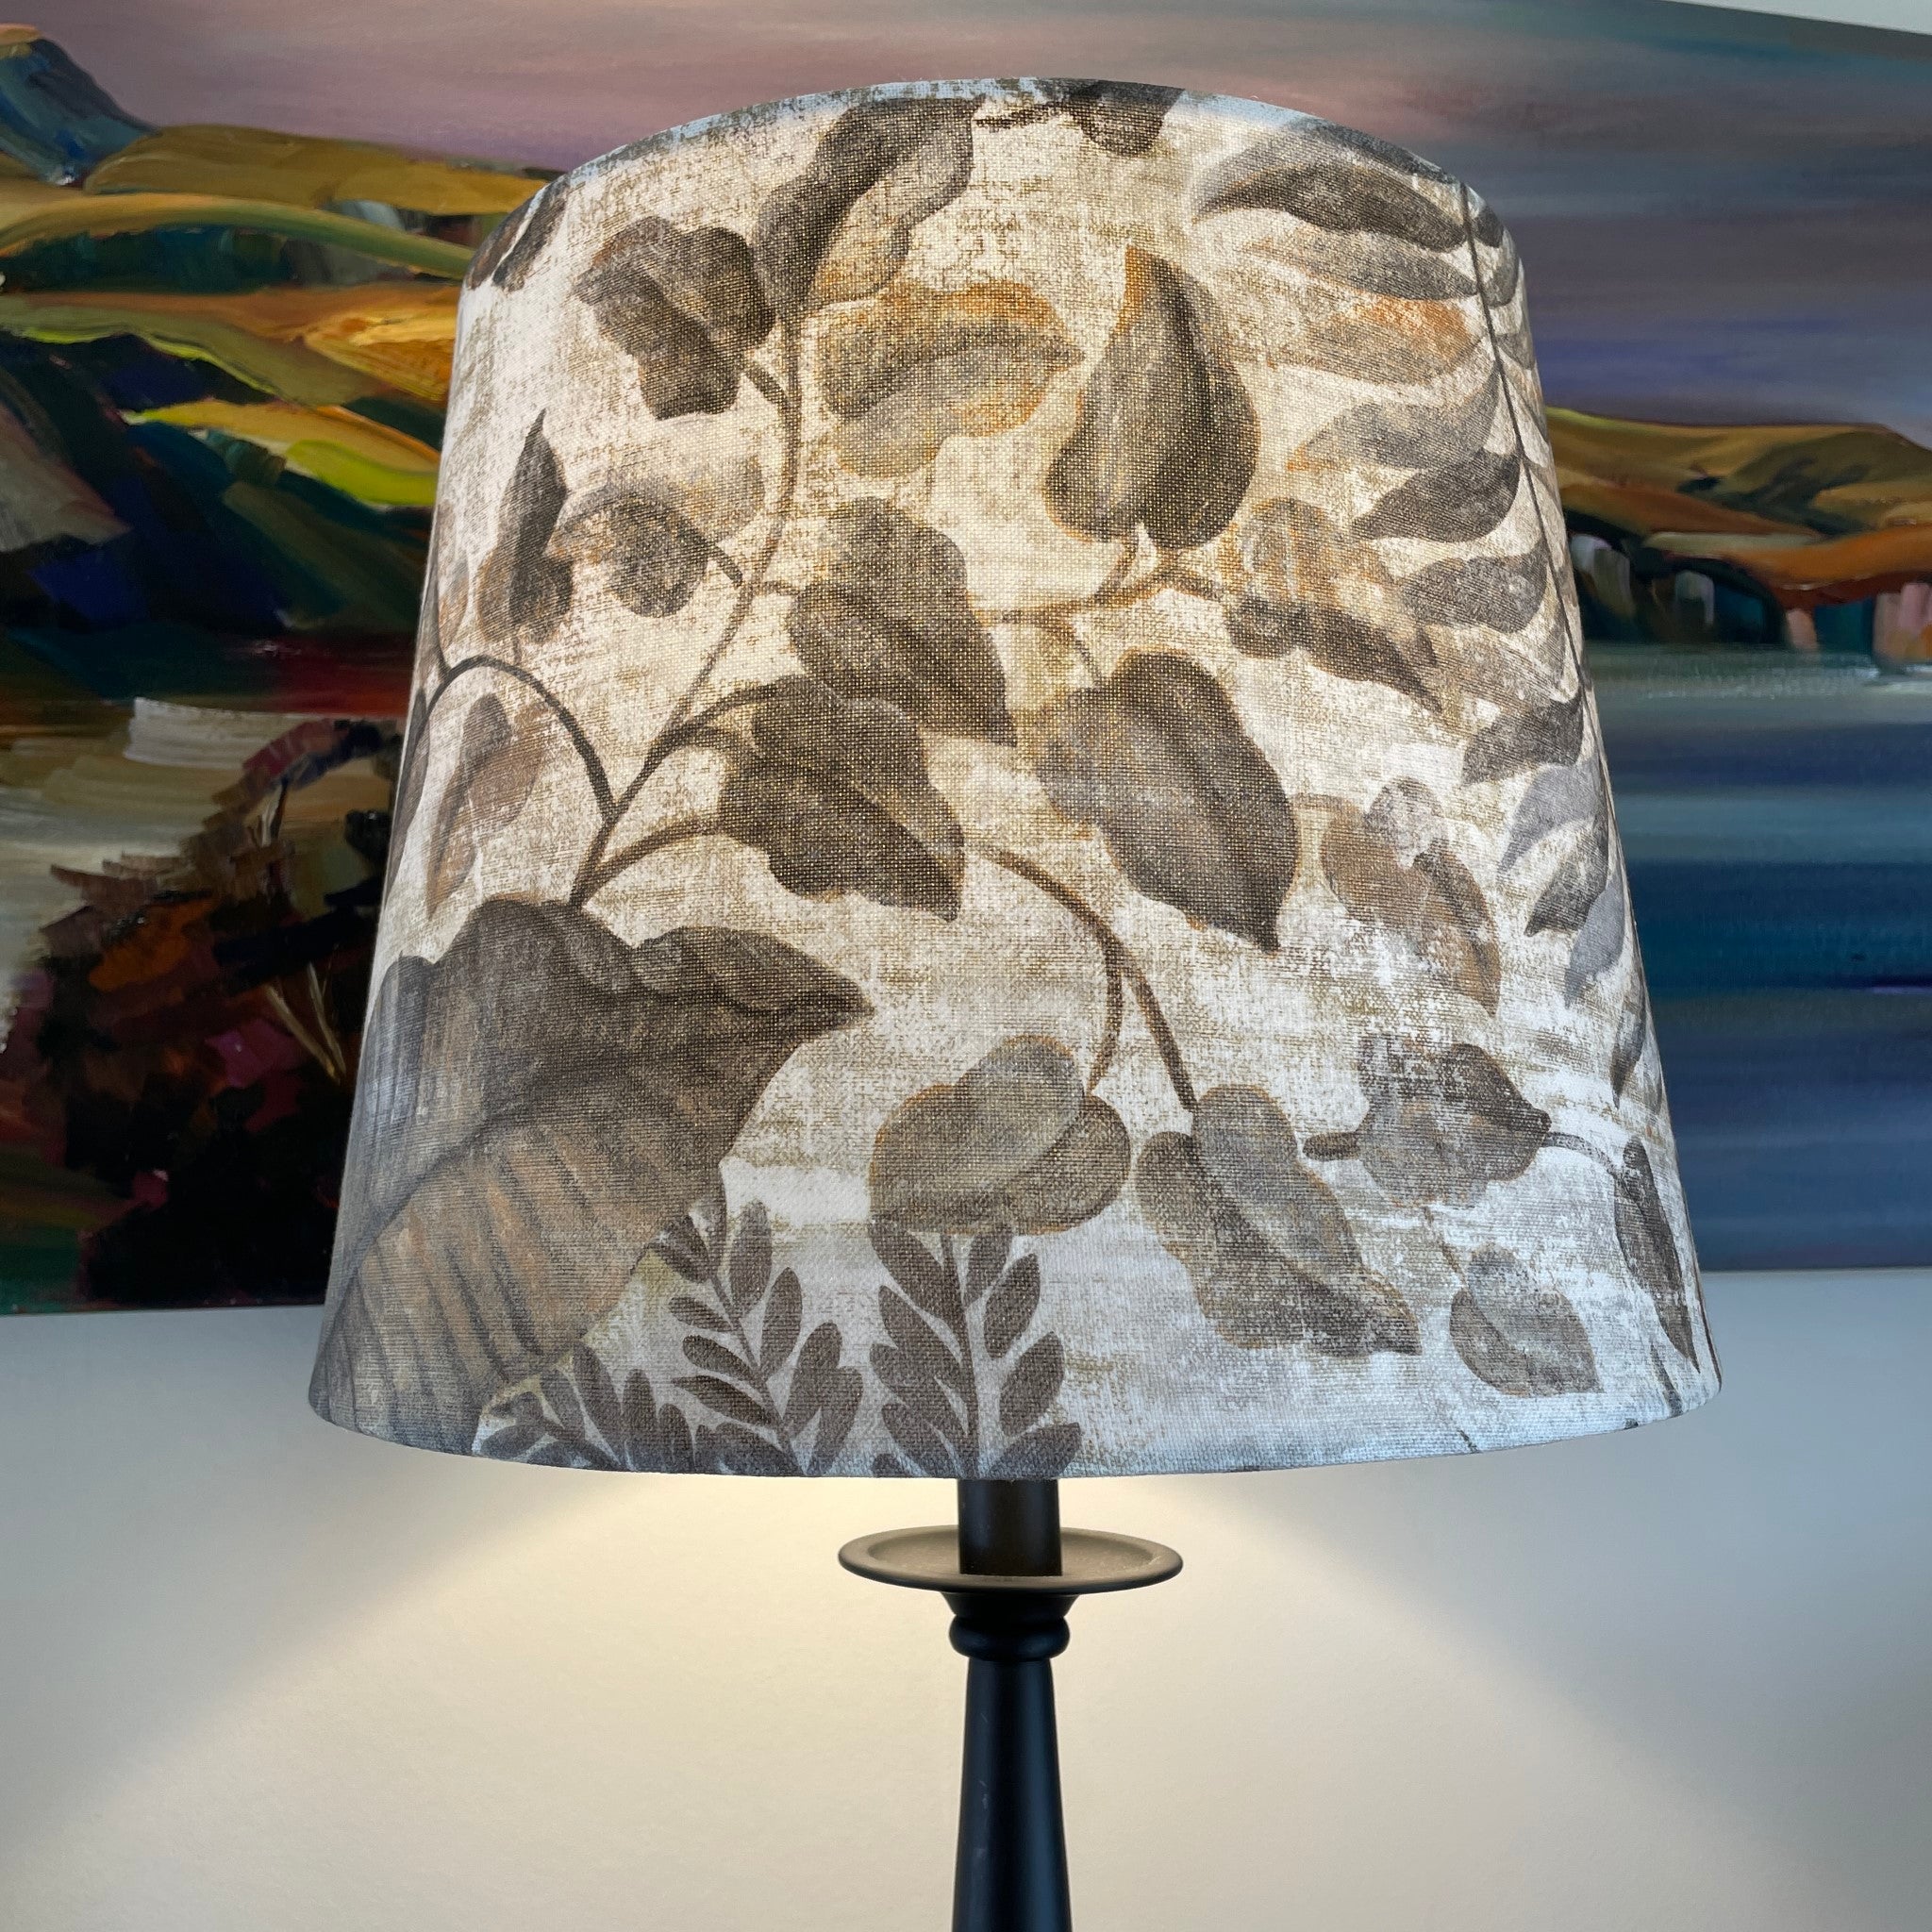  Large tapered fabric lamp shade, lit.